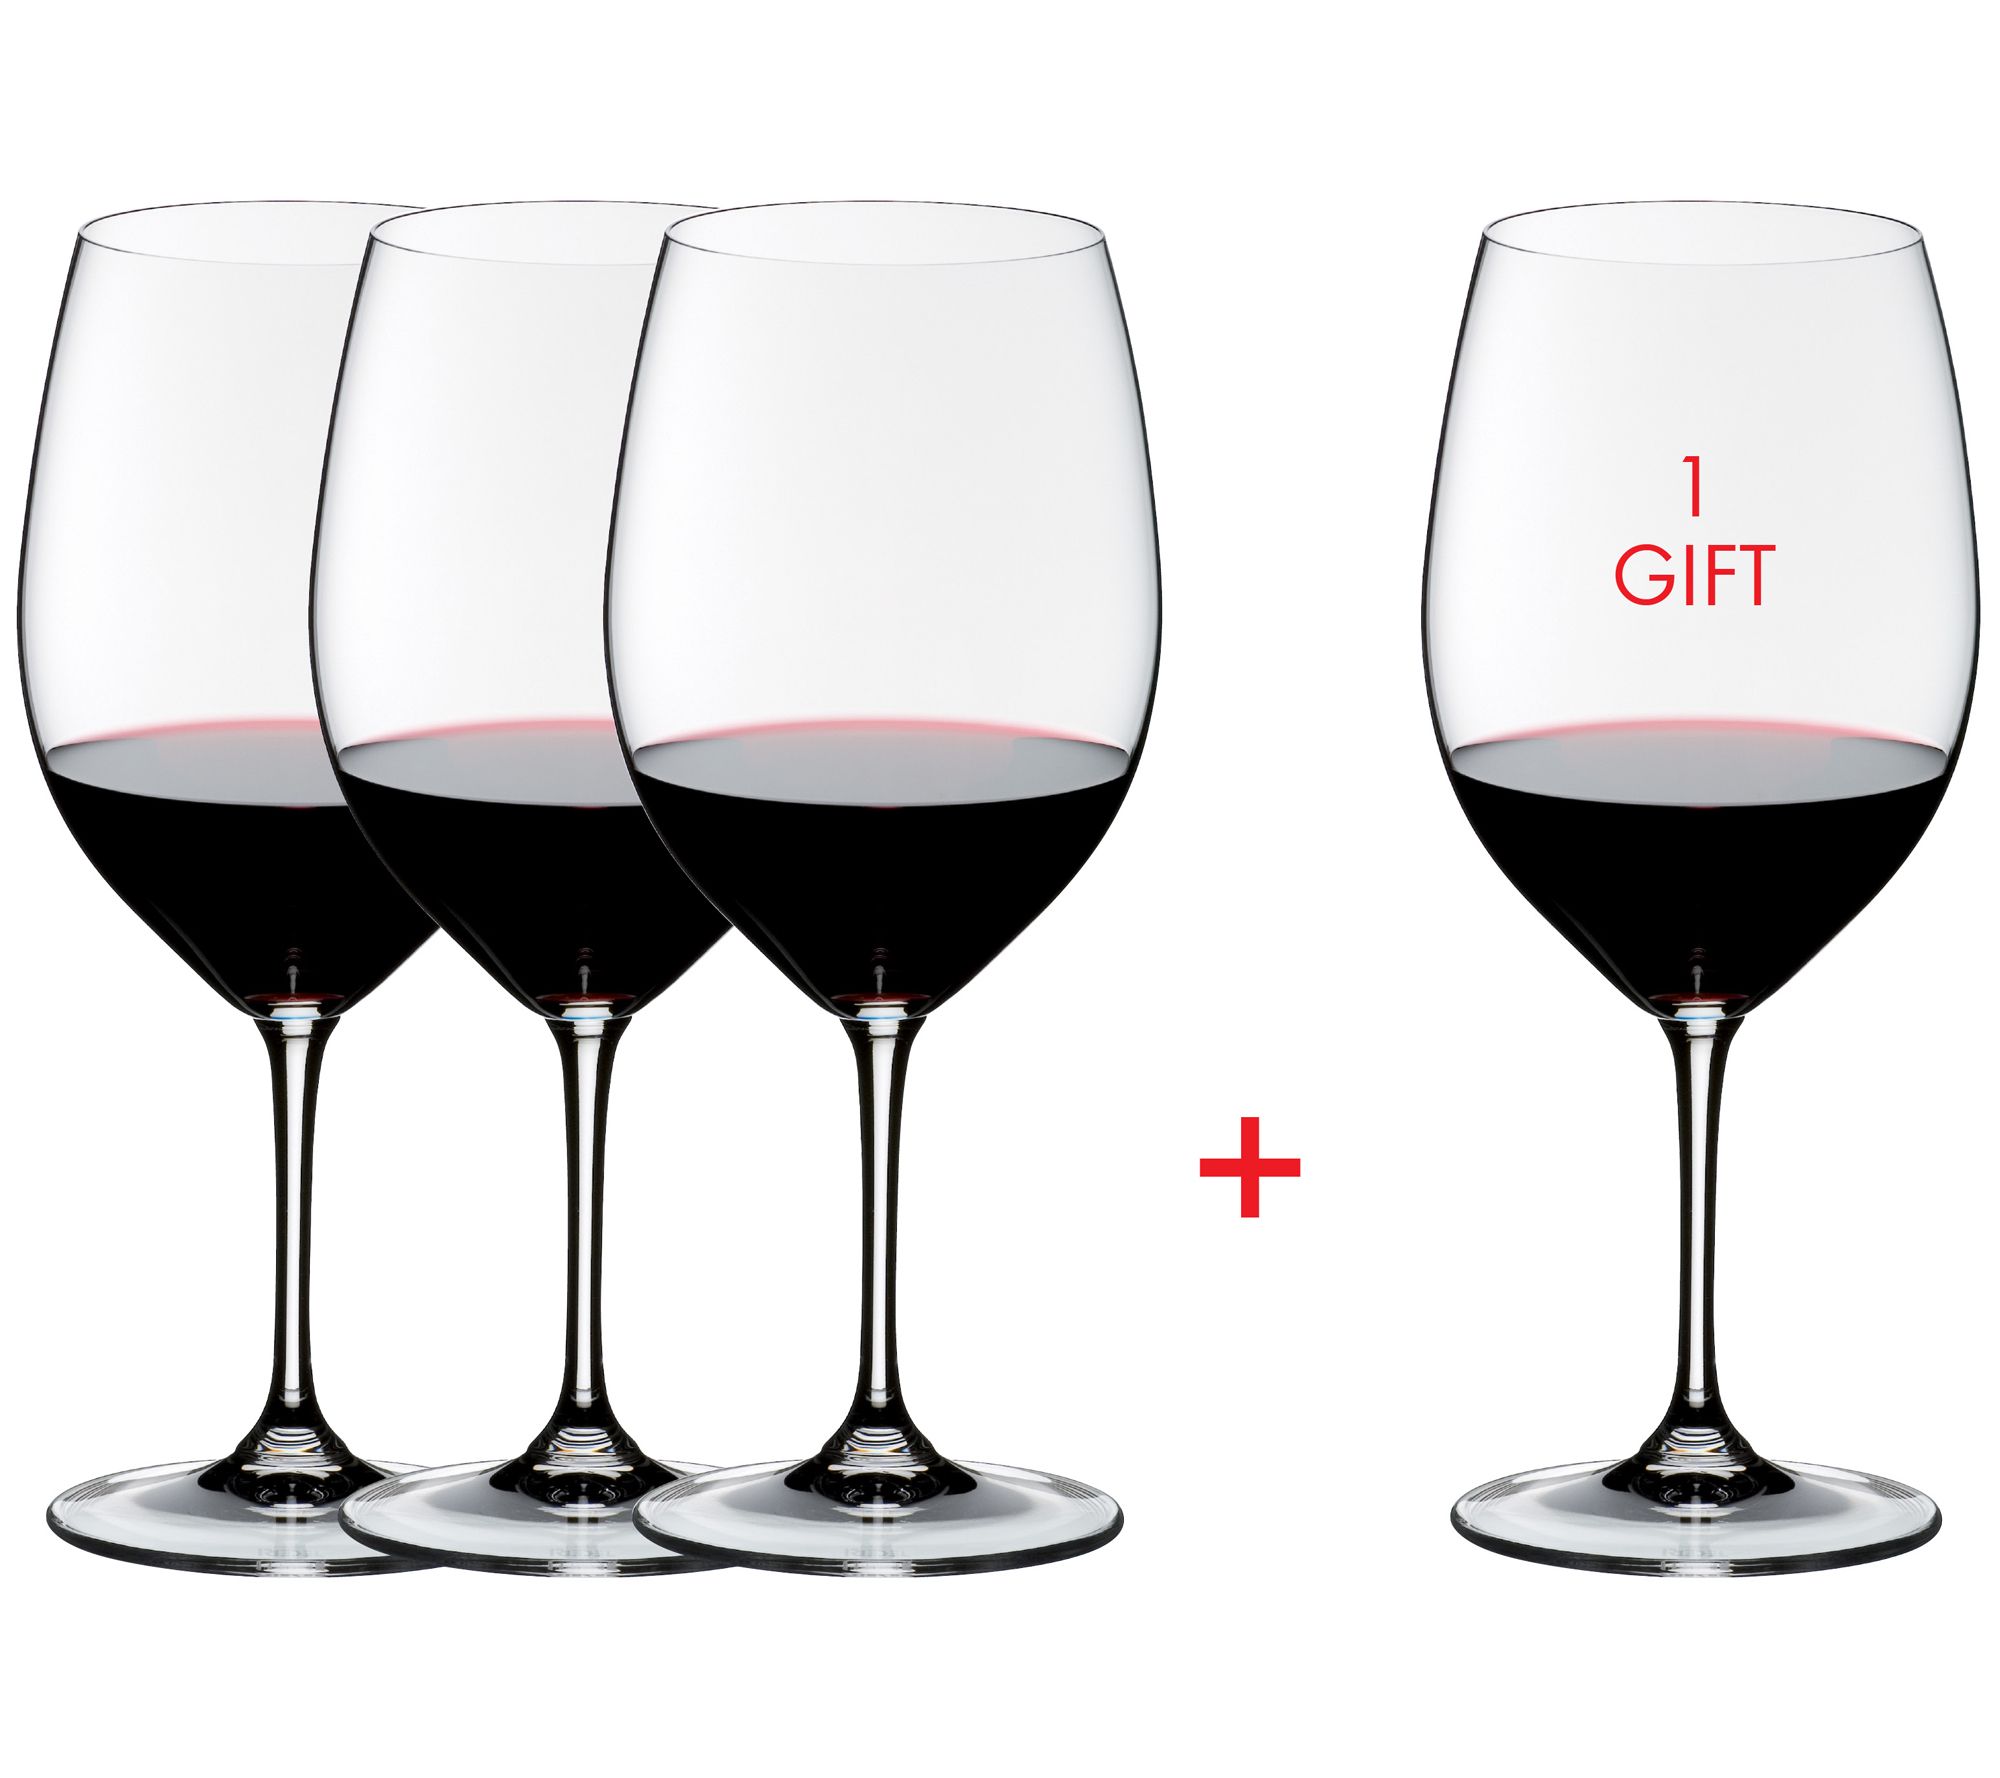 Riedel Extreme Cabernet Wine Glasses (Set of 4, Clear)